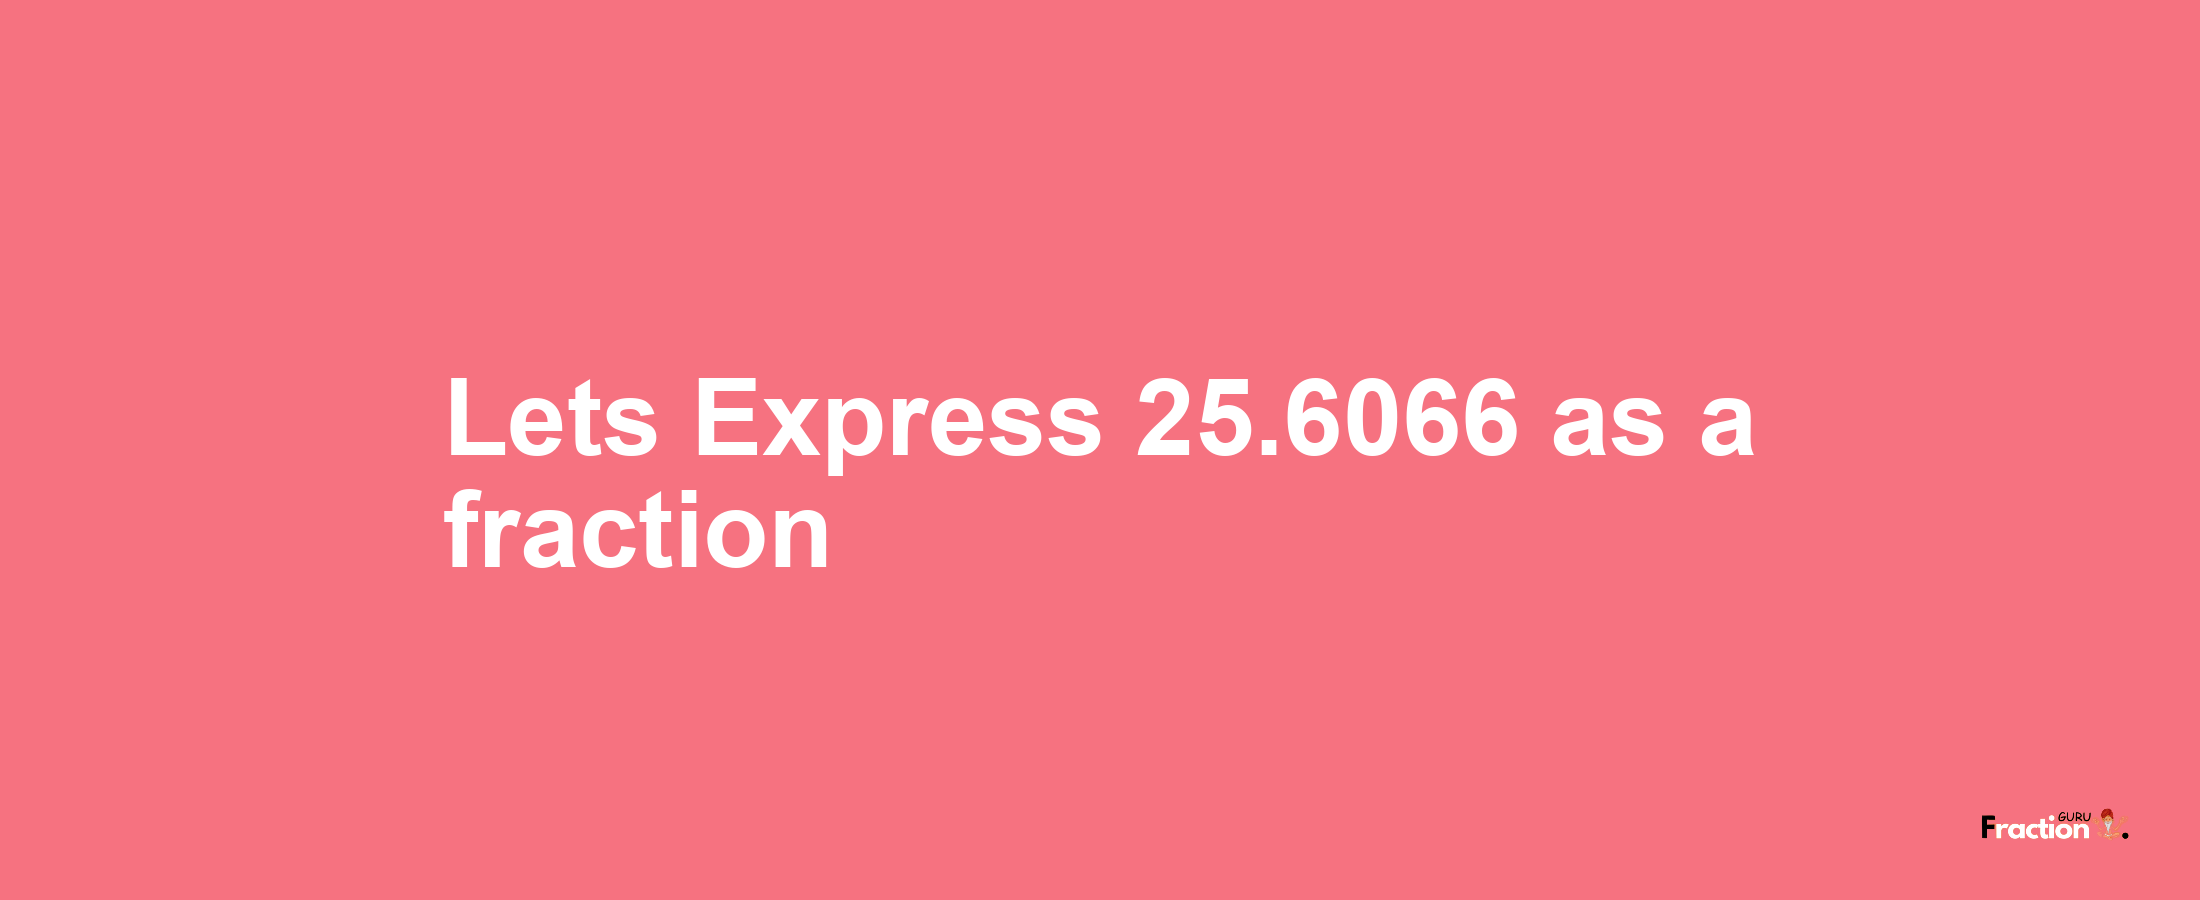 Lets Express 25.6066 as afraction